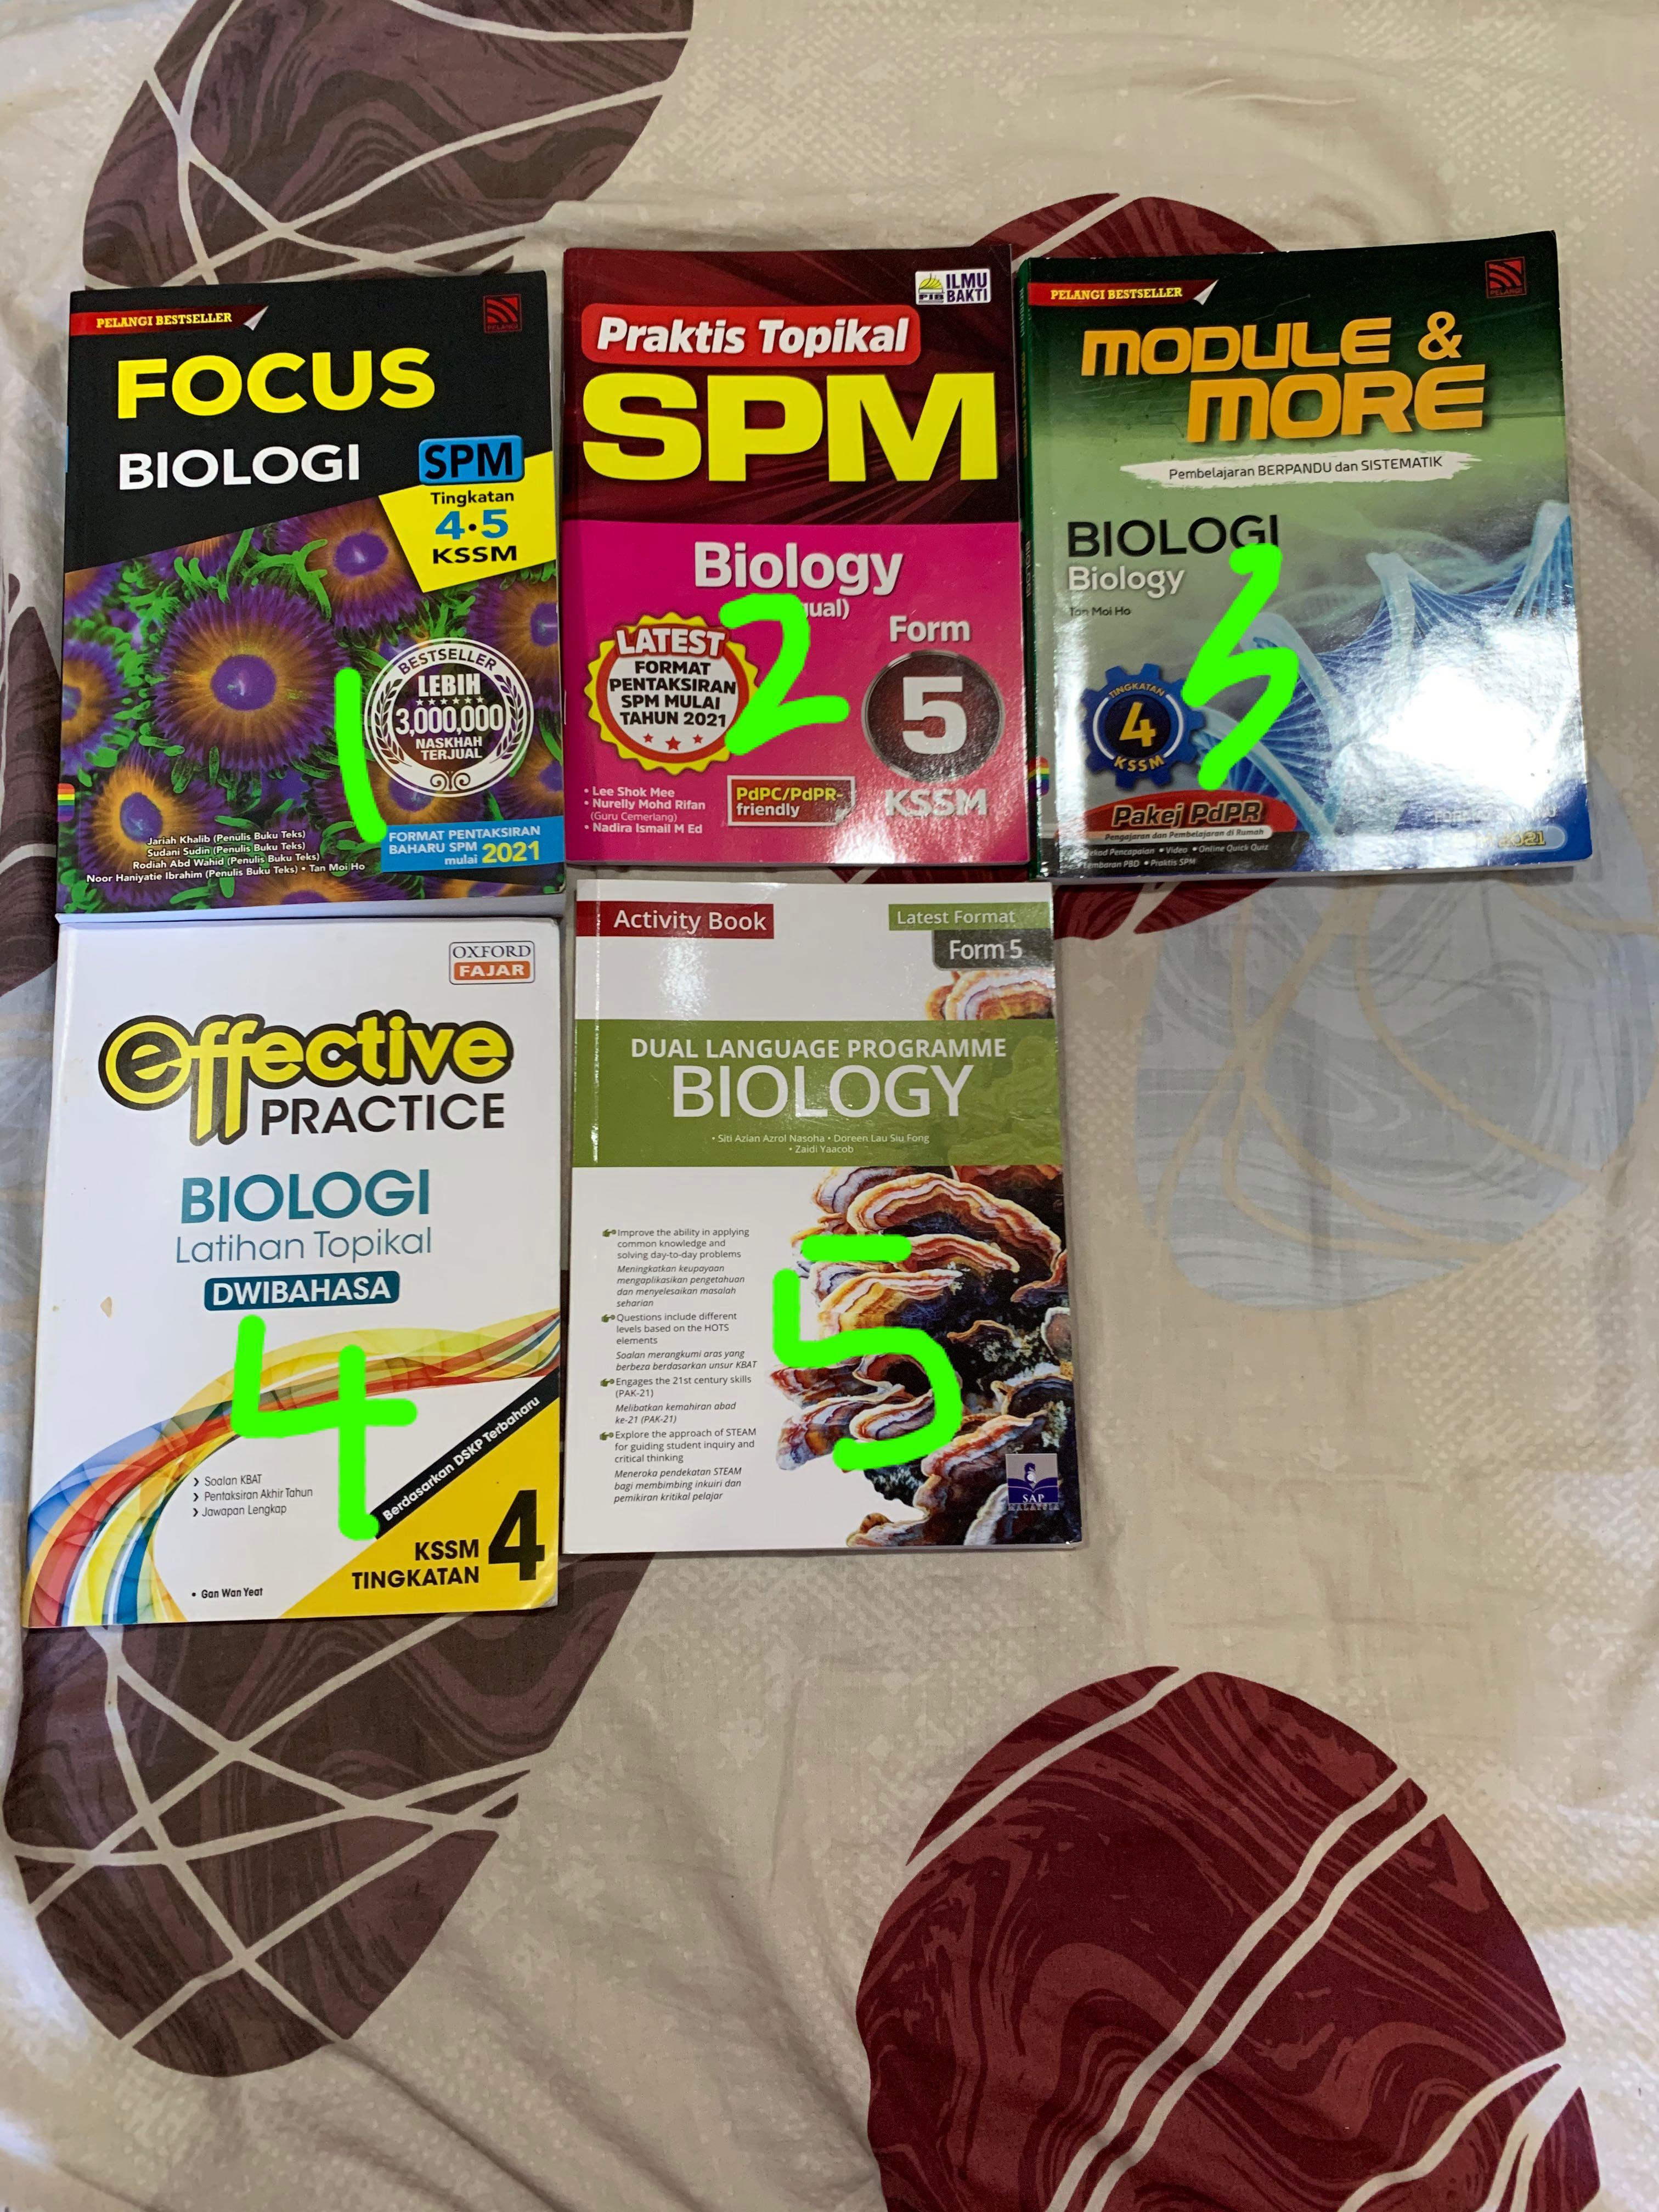 Kssm And Kbsm Biology Form 4 And Form 5 Reference And Exercise Books Books Stationery Books On Carousell